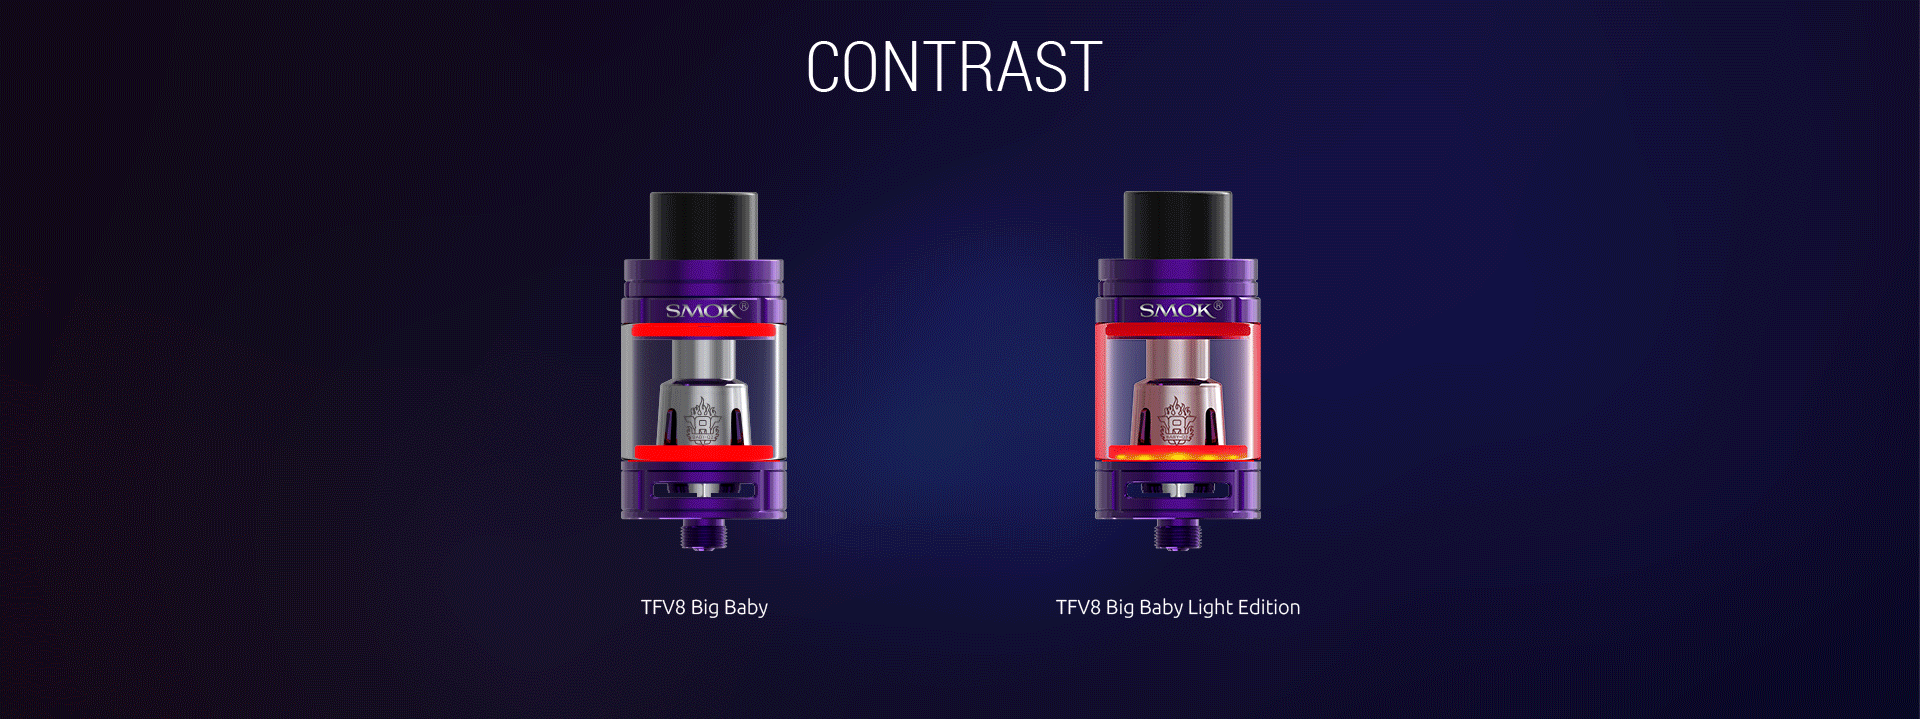 TFV8 Big Baby Light Edition - SMOK® Innovation Keeps Changing the Vaping Experience